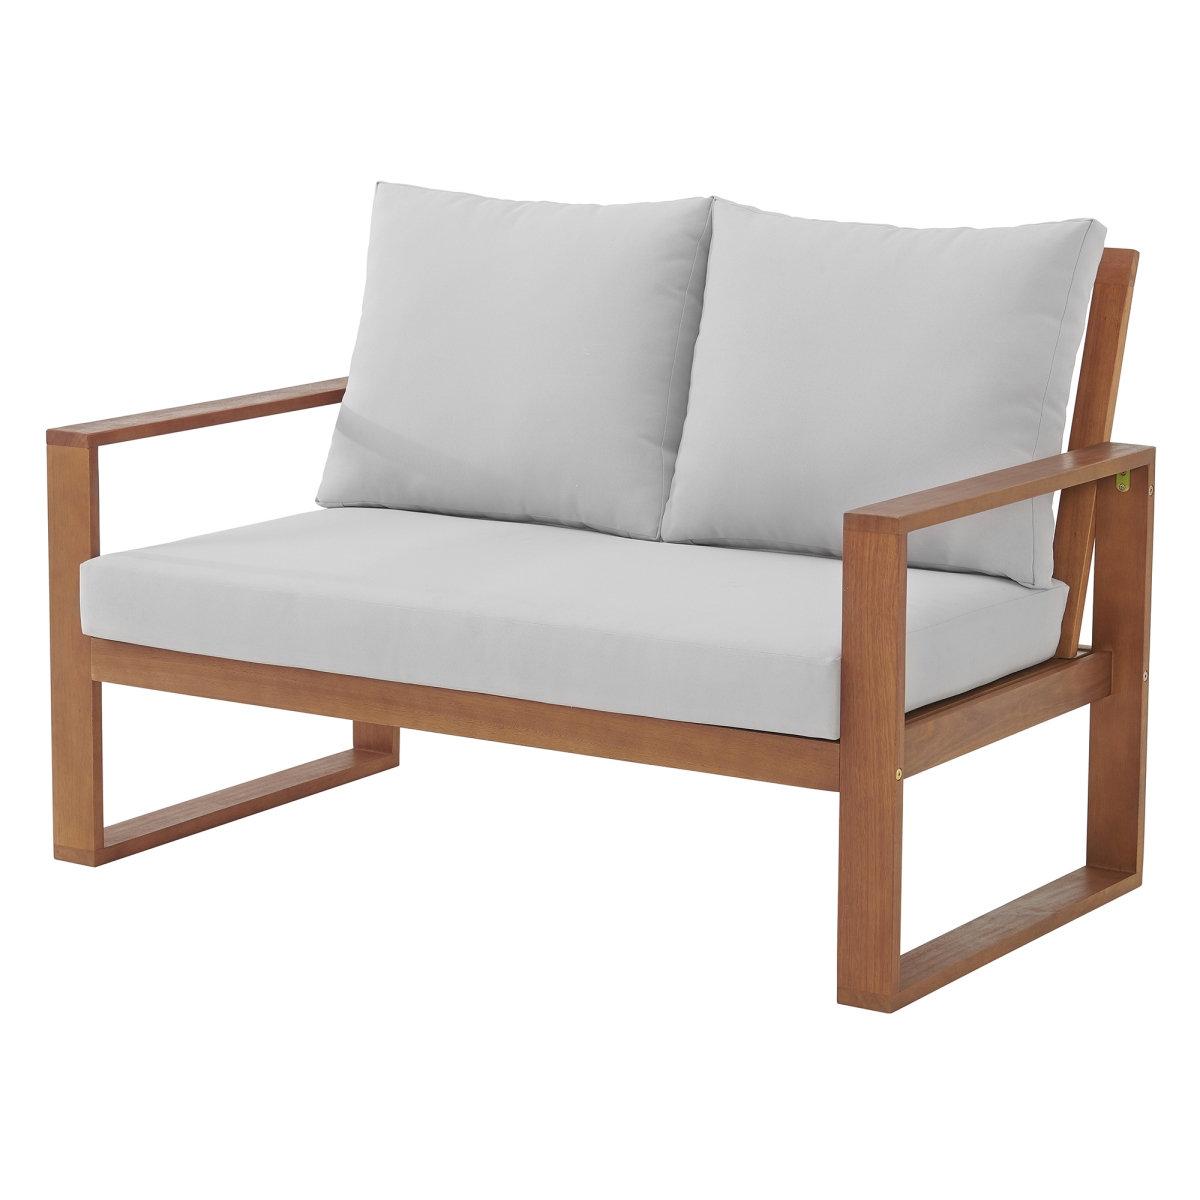 Picture of Alaterre ANGT02EBO Grafton Eucalyptus 2-Seat Outdoor Bench with Gray Cushions